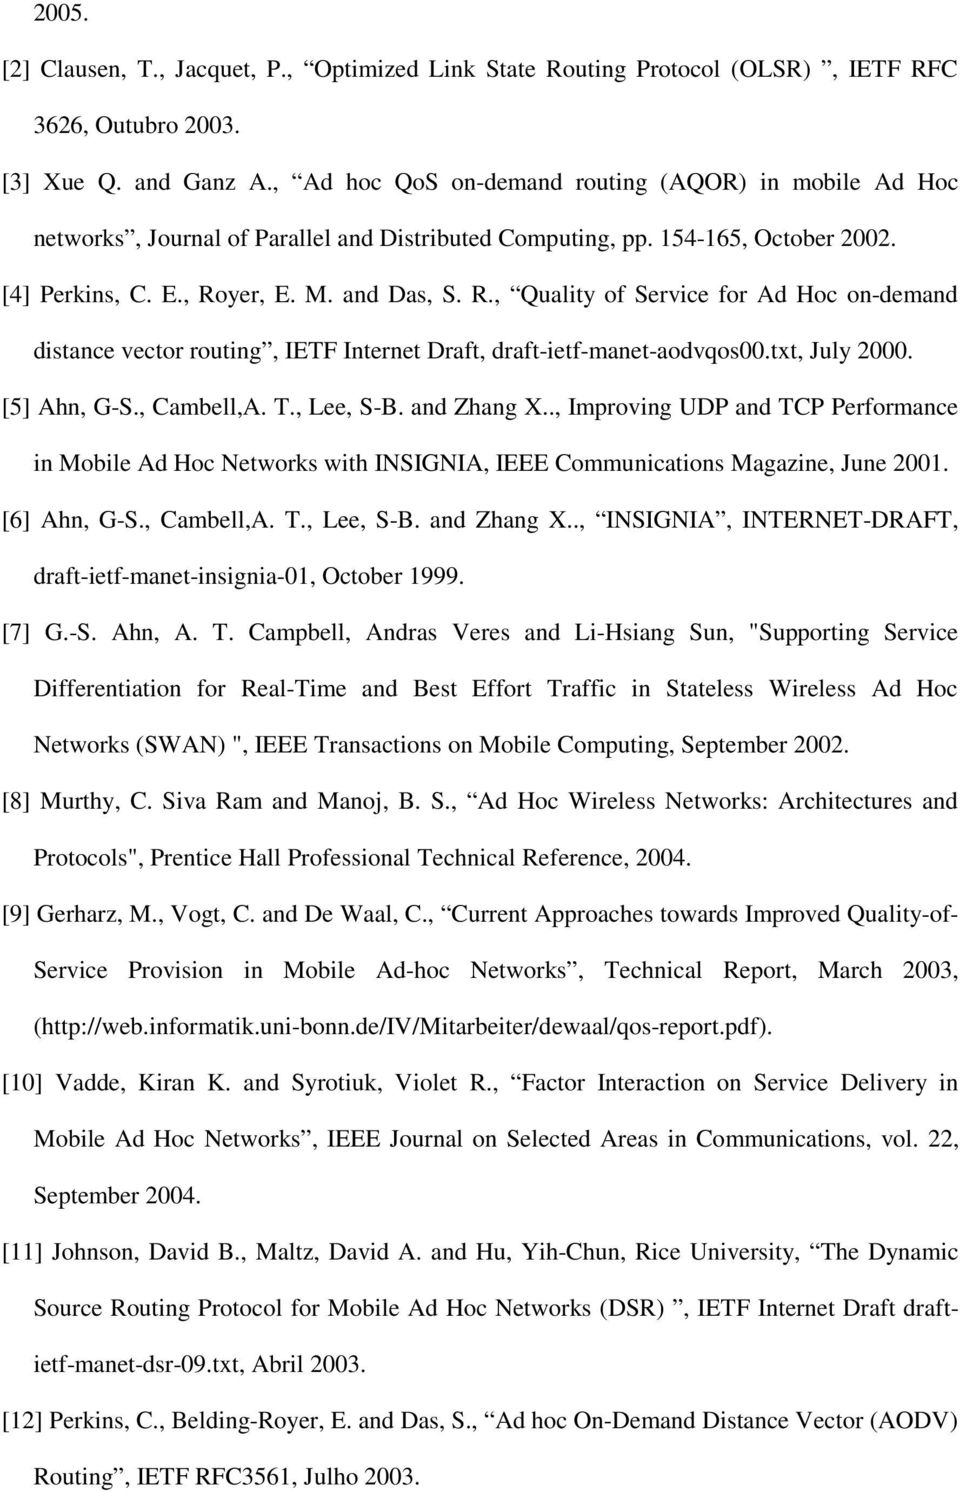 yer, E. M. and Das, S. R., Quality of Service for Ad Hoc on-demand distance vector routing, IETF Internet Draft, draft-ietf-manet-aodvqos00.txt, July 2000. [5] Ahn, G-S., Cambell,A. T., Lee, S-B.